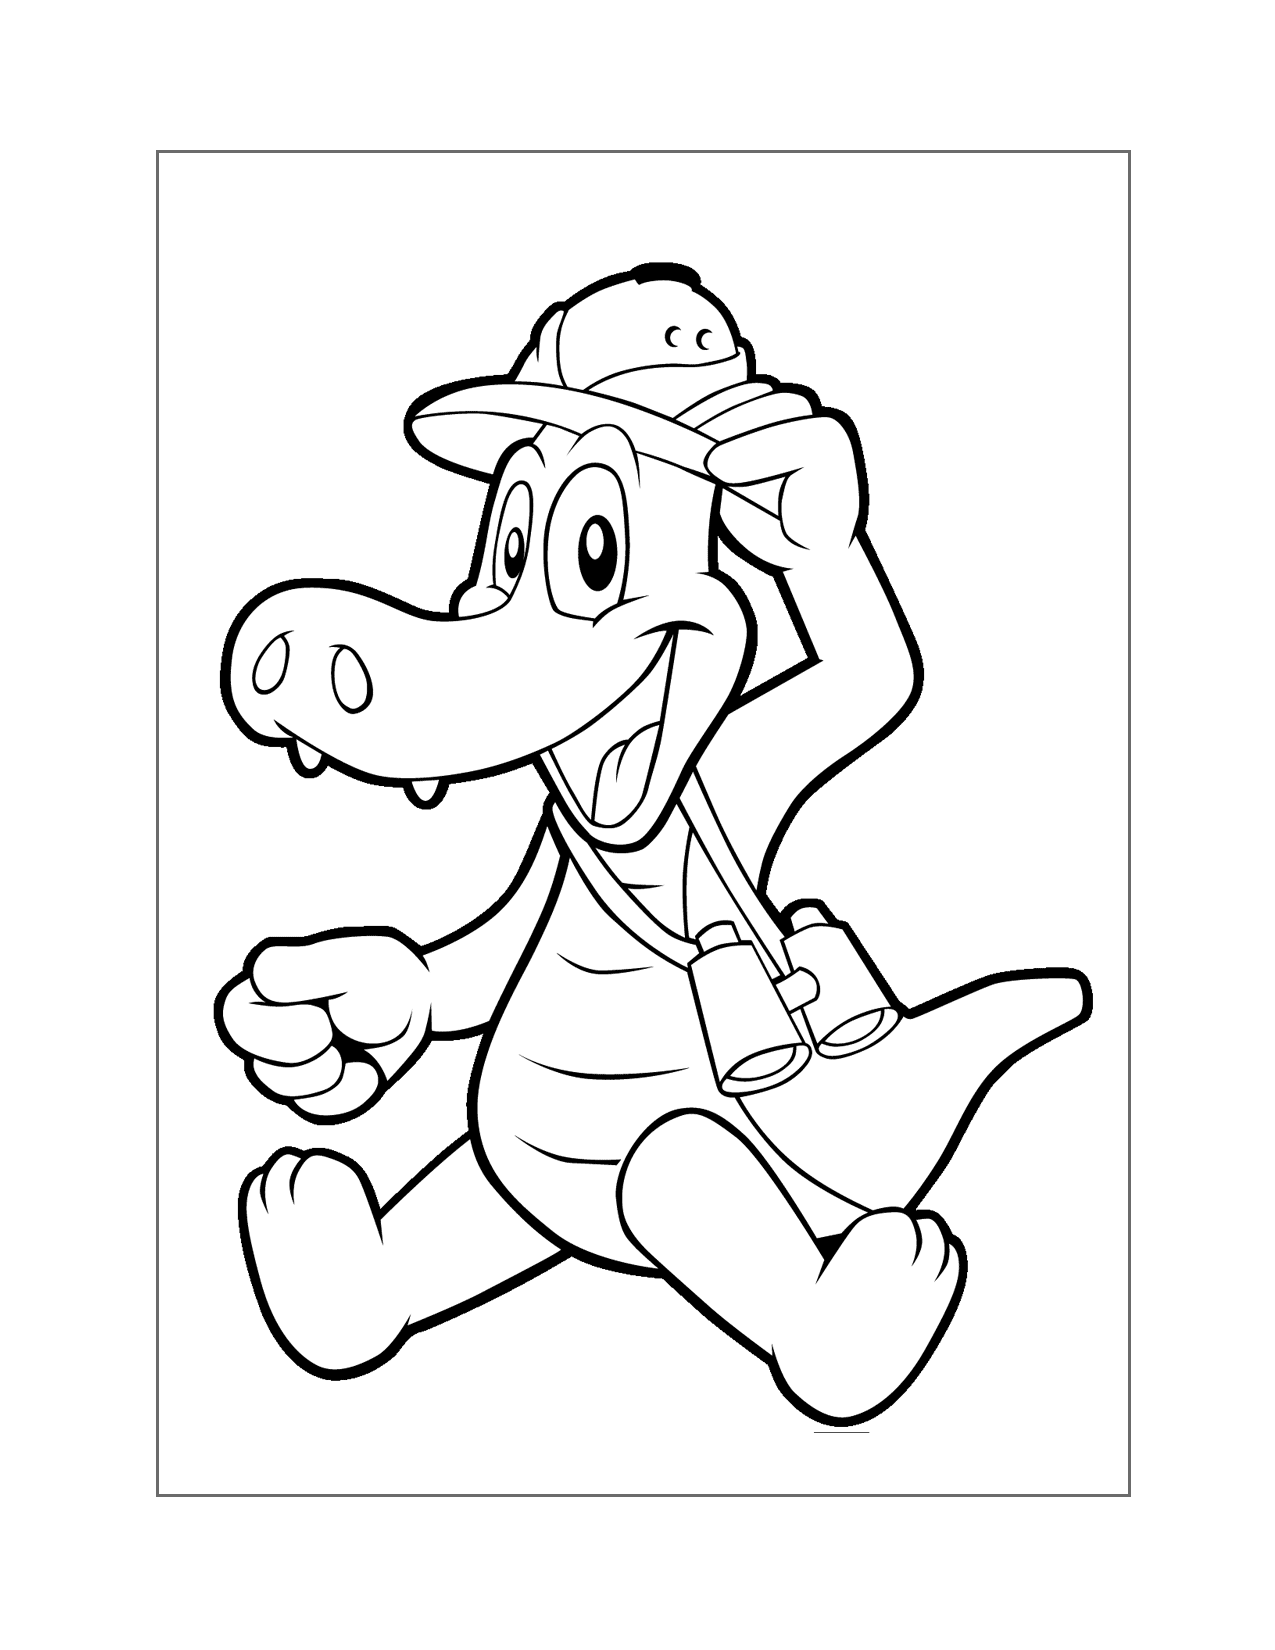 Adorable Alligator Coloring Page